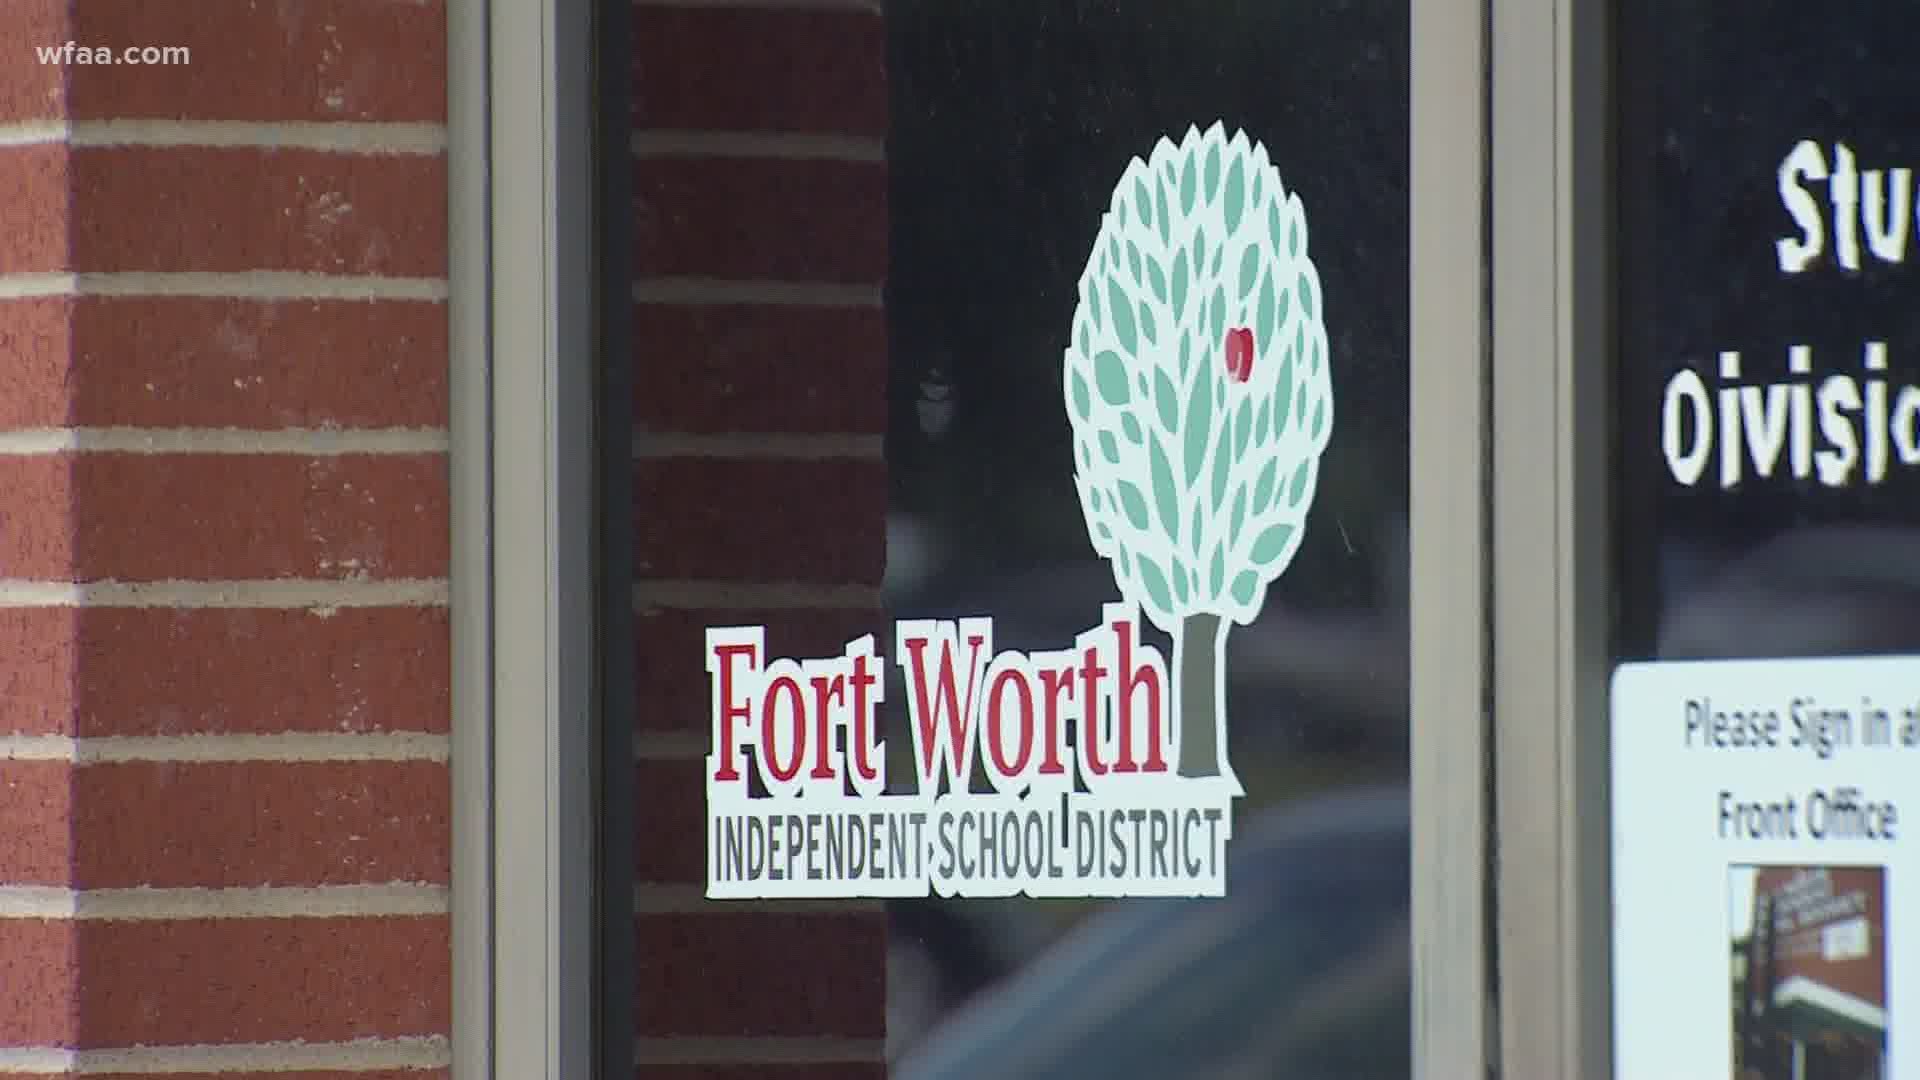 Fort Worth ISD released its 24-page plan for Fall 2020 Monday afternoon. It includes keeping the start date of August 17th.